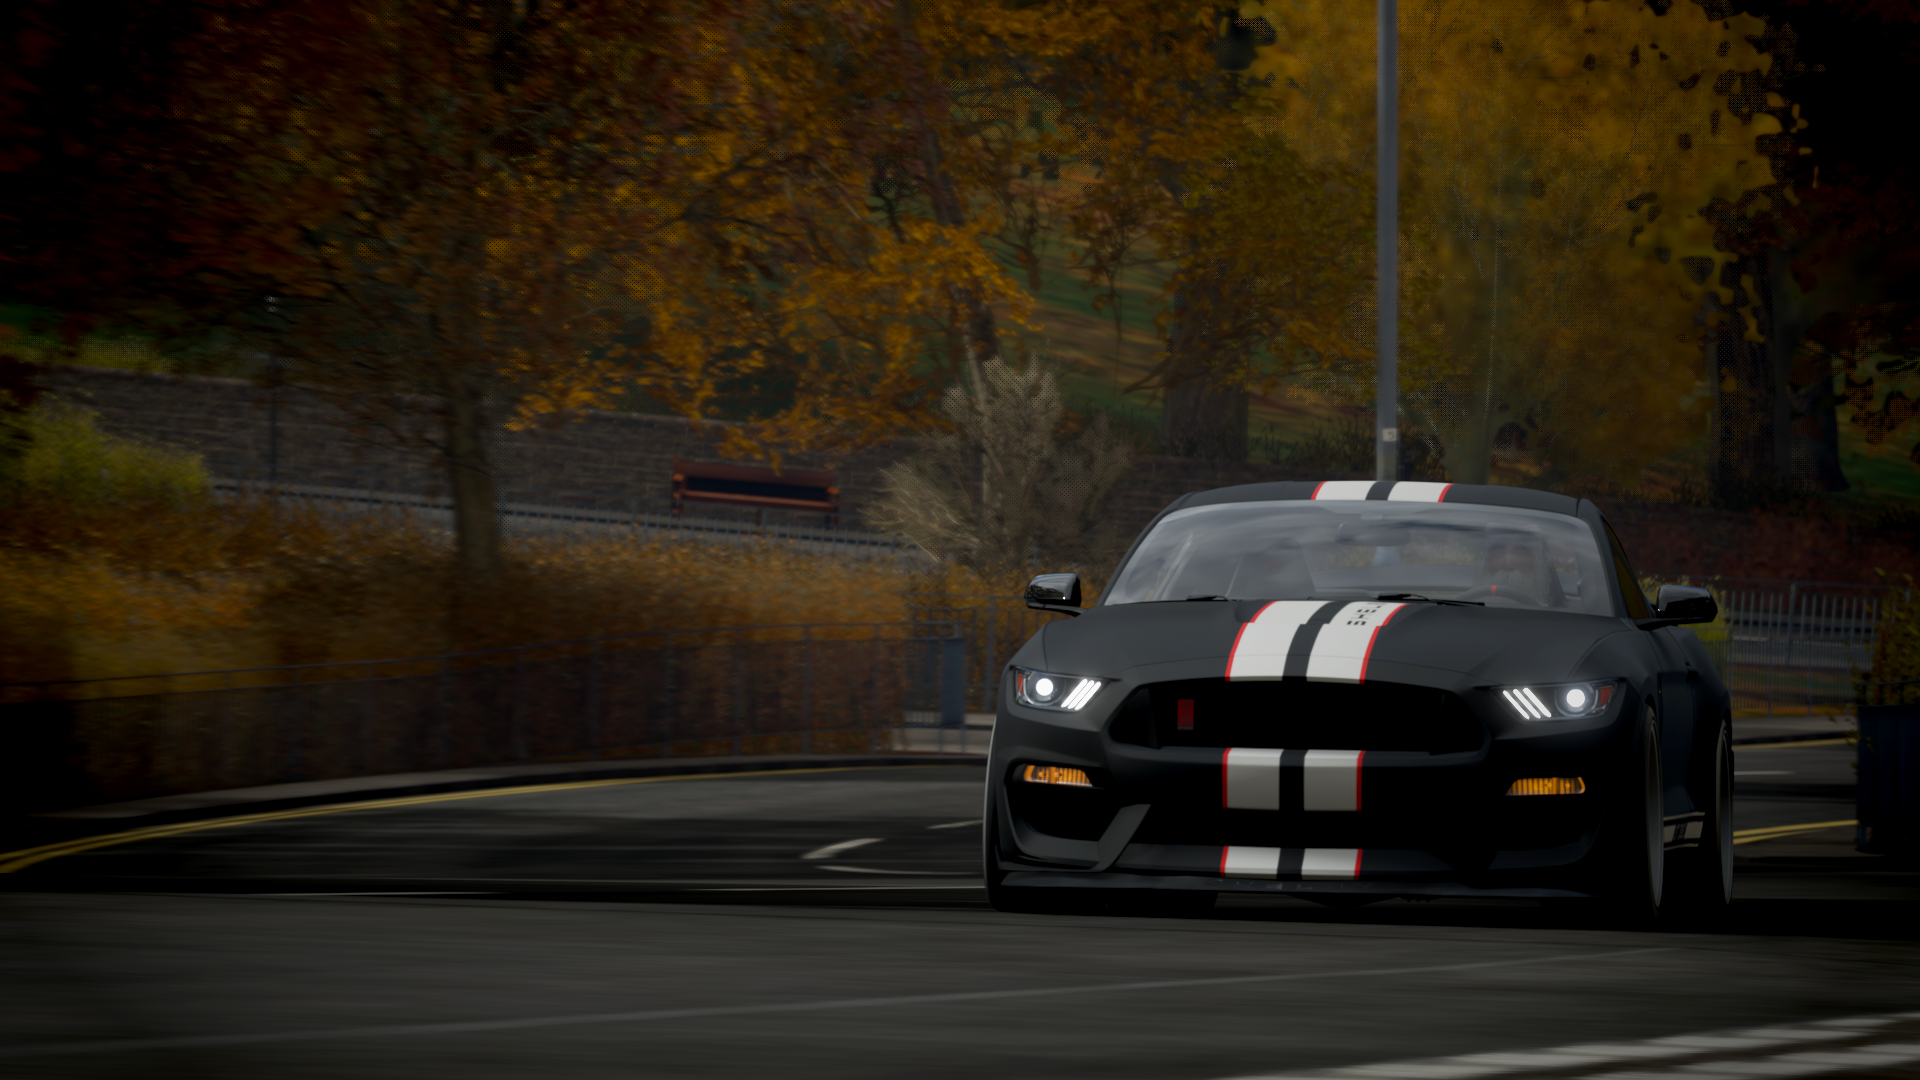 Ford Shelby GT500 Ford Forza Horizon 4 Shelby GT500 Video Games 1920x1080